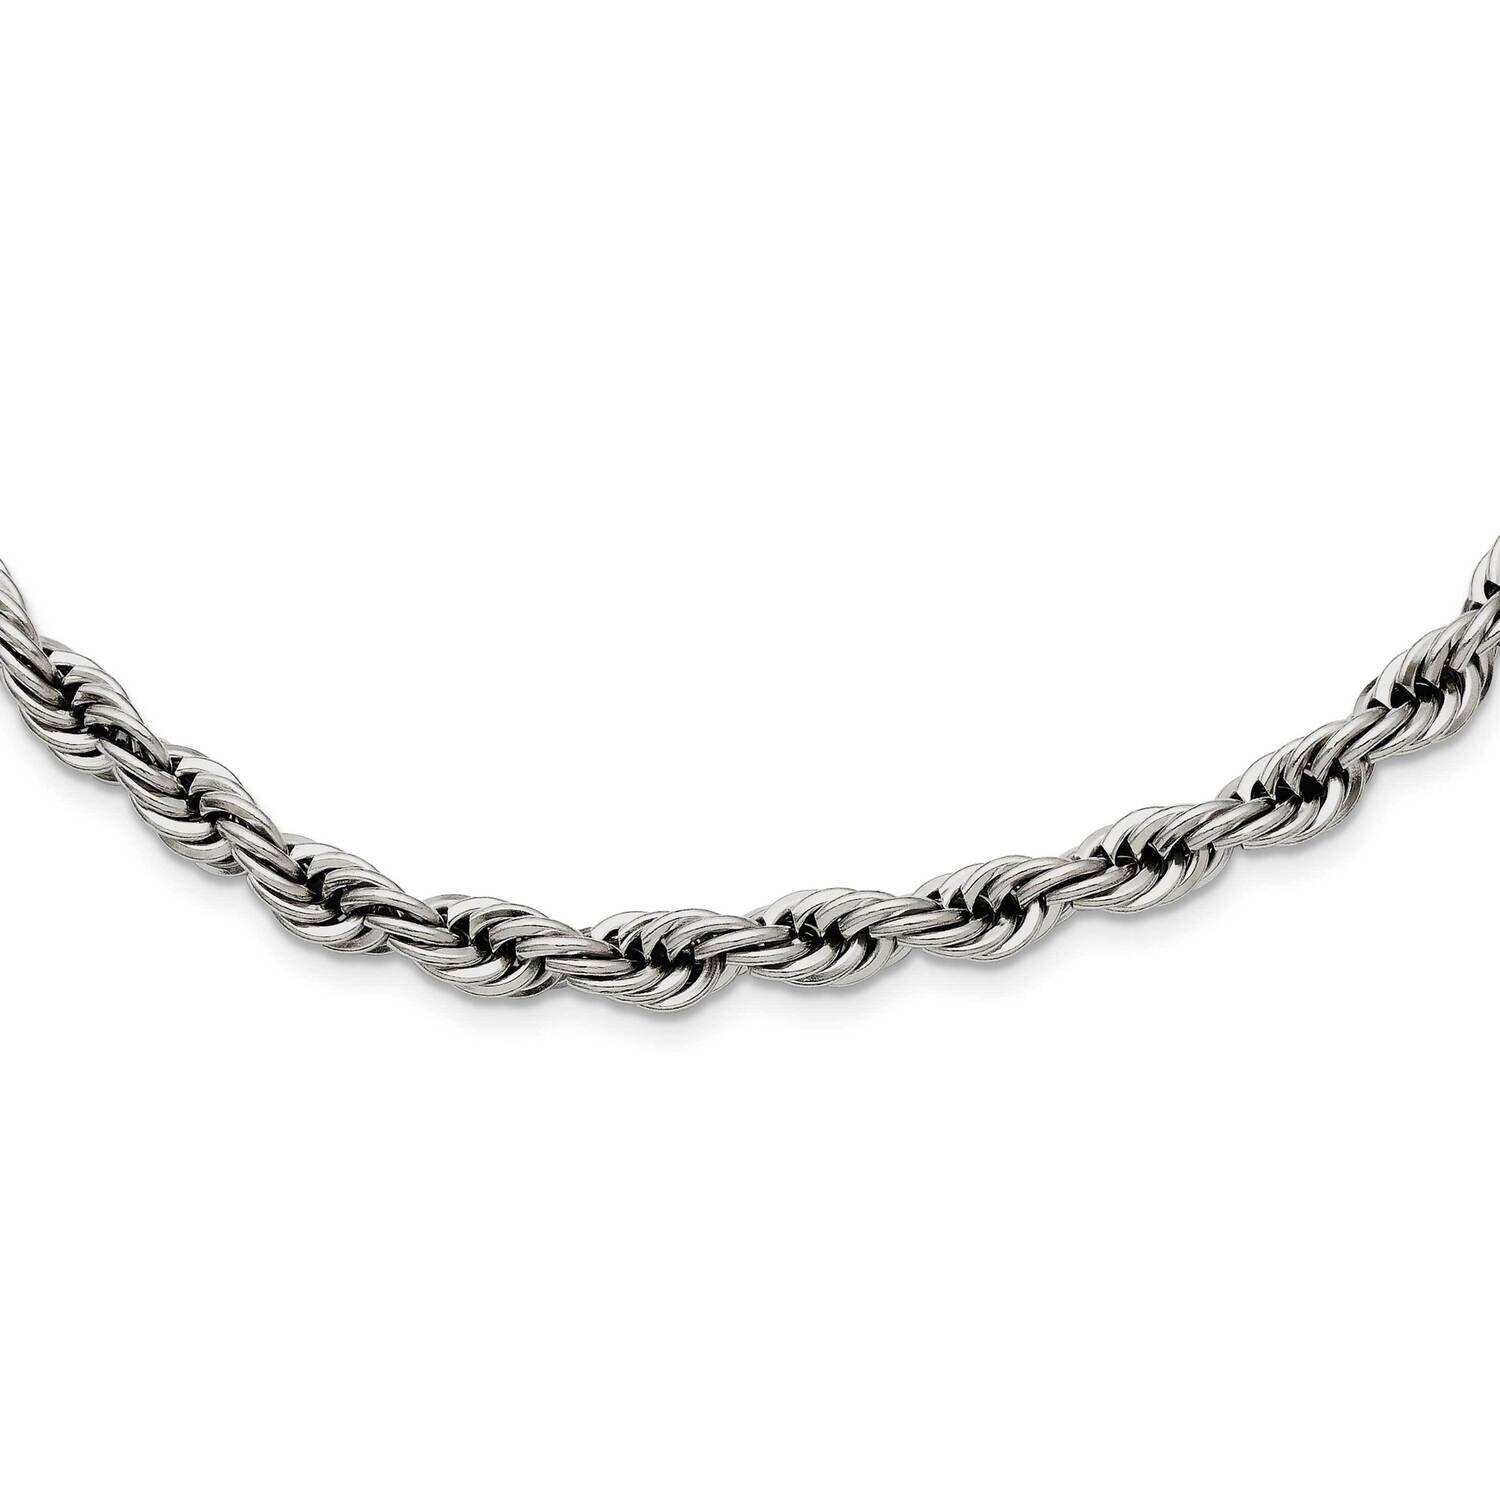 6mm Rope Necklace Stainless Steel Polished SRN1243-20